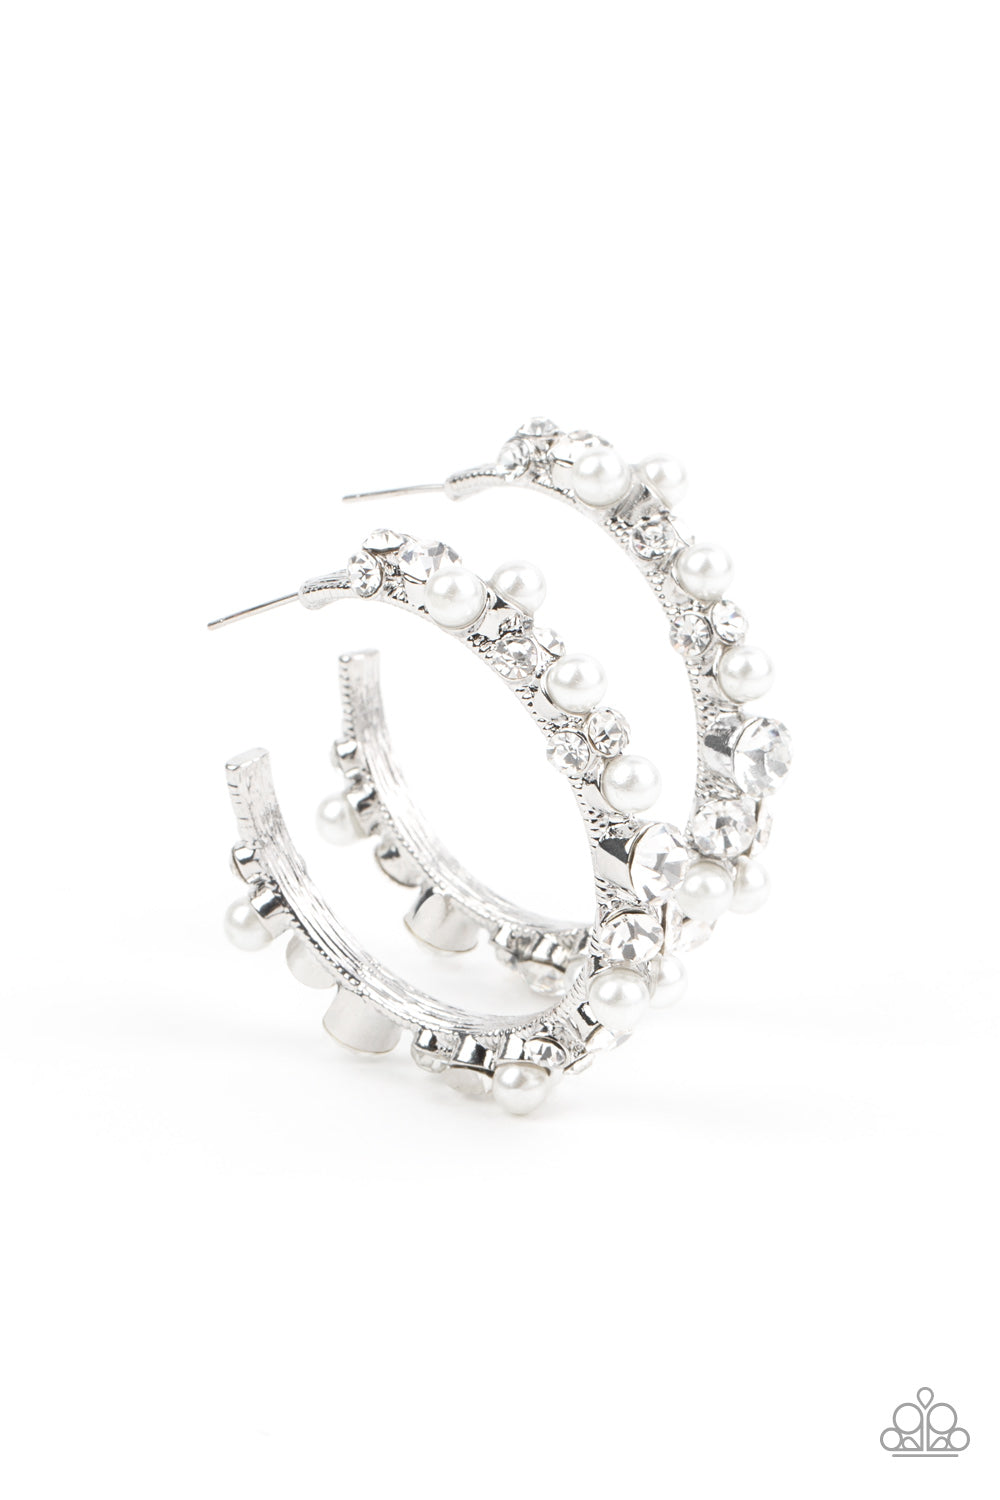 Let There Be SOCIALITE - White - Paparazzi earrings